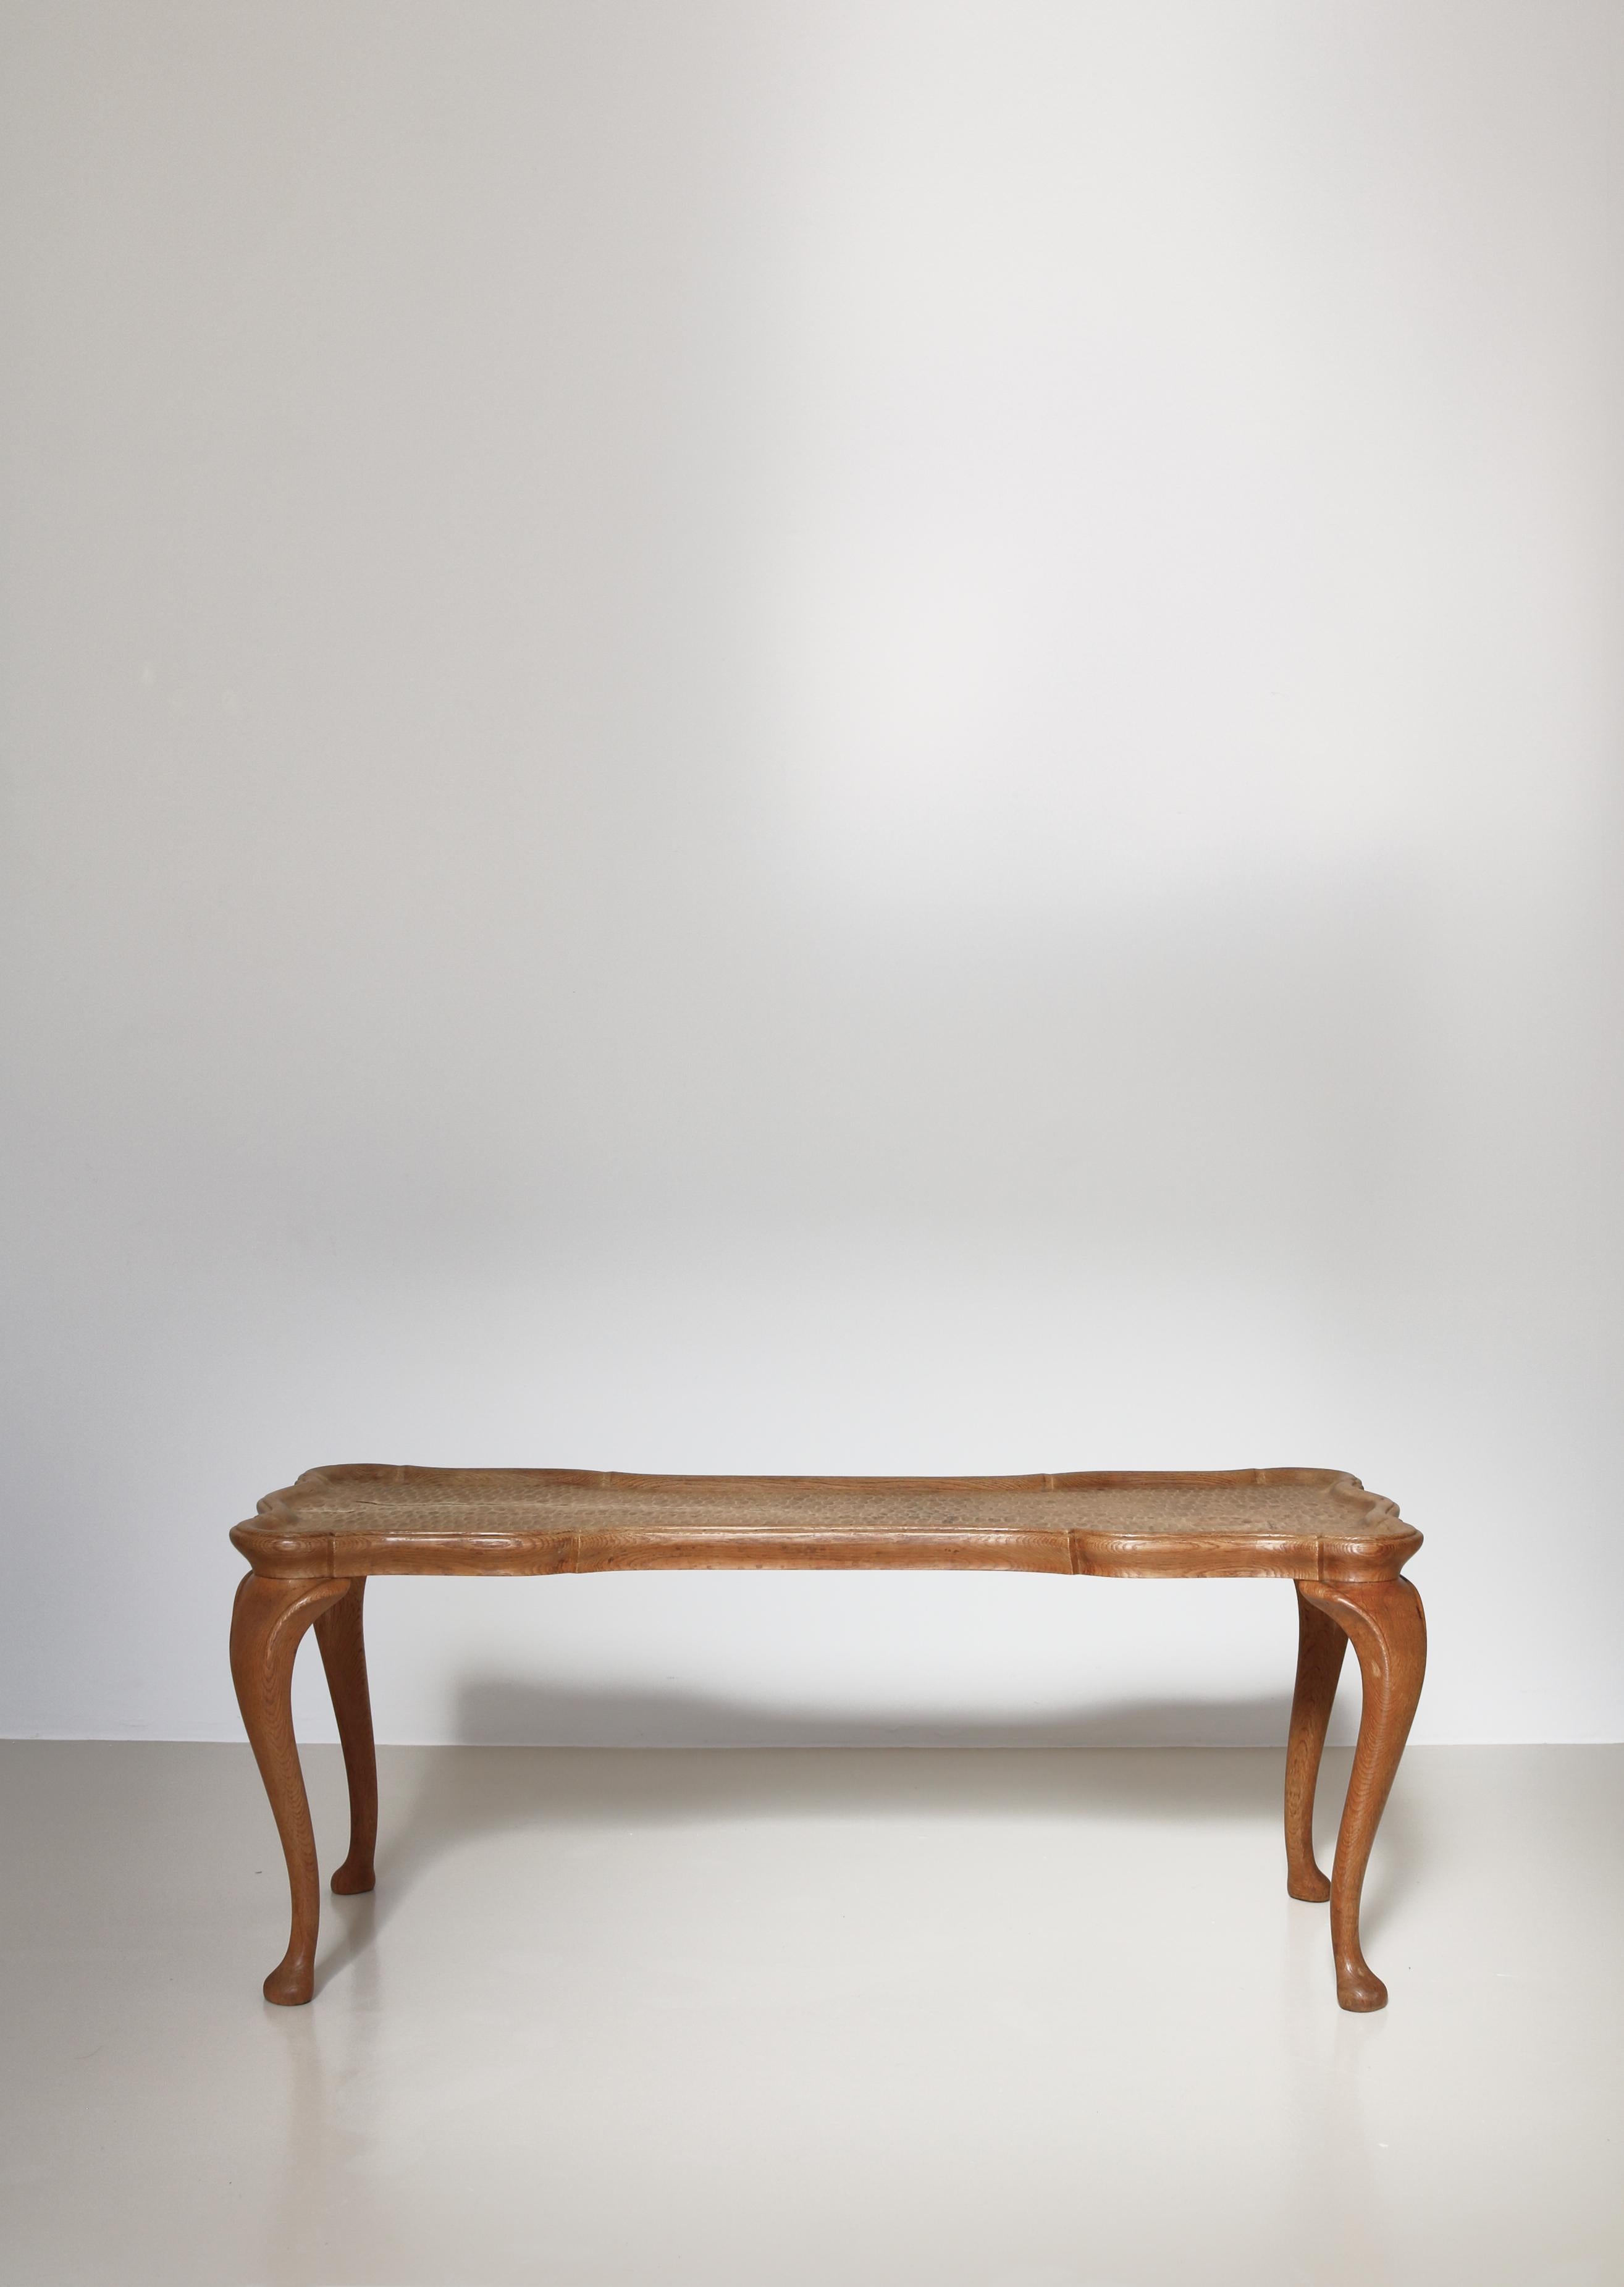 Scandinavian Modern Frits Henningsen Carved Coffee Table with Gouged Top Solid Oak, Denmark, 1940s